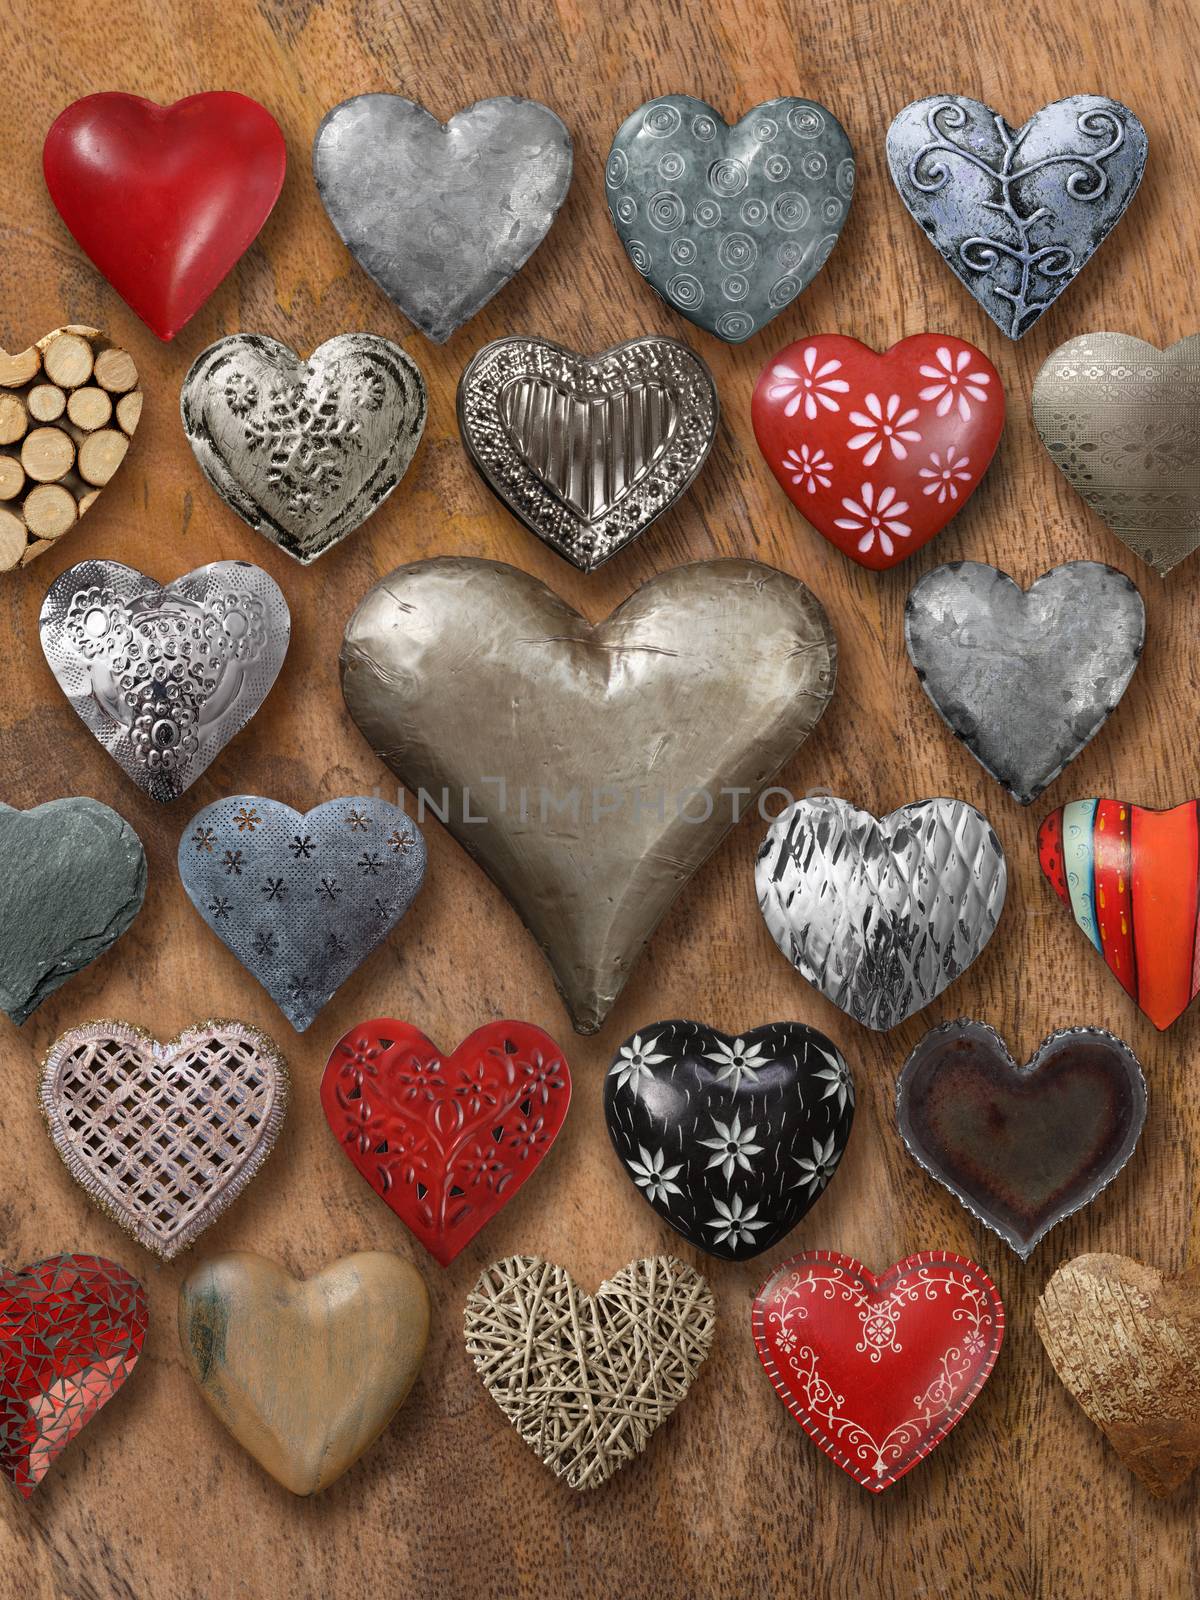 Many hearts on wood background by sumners